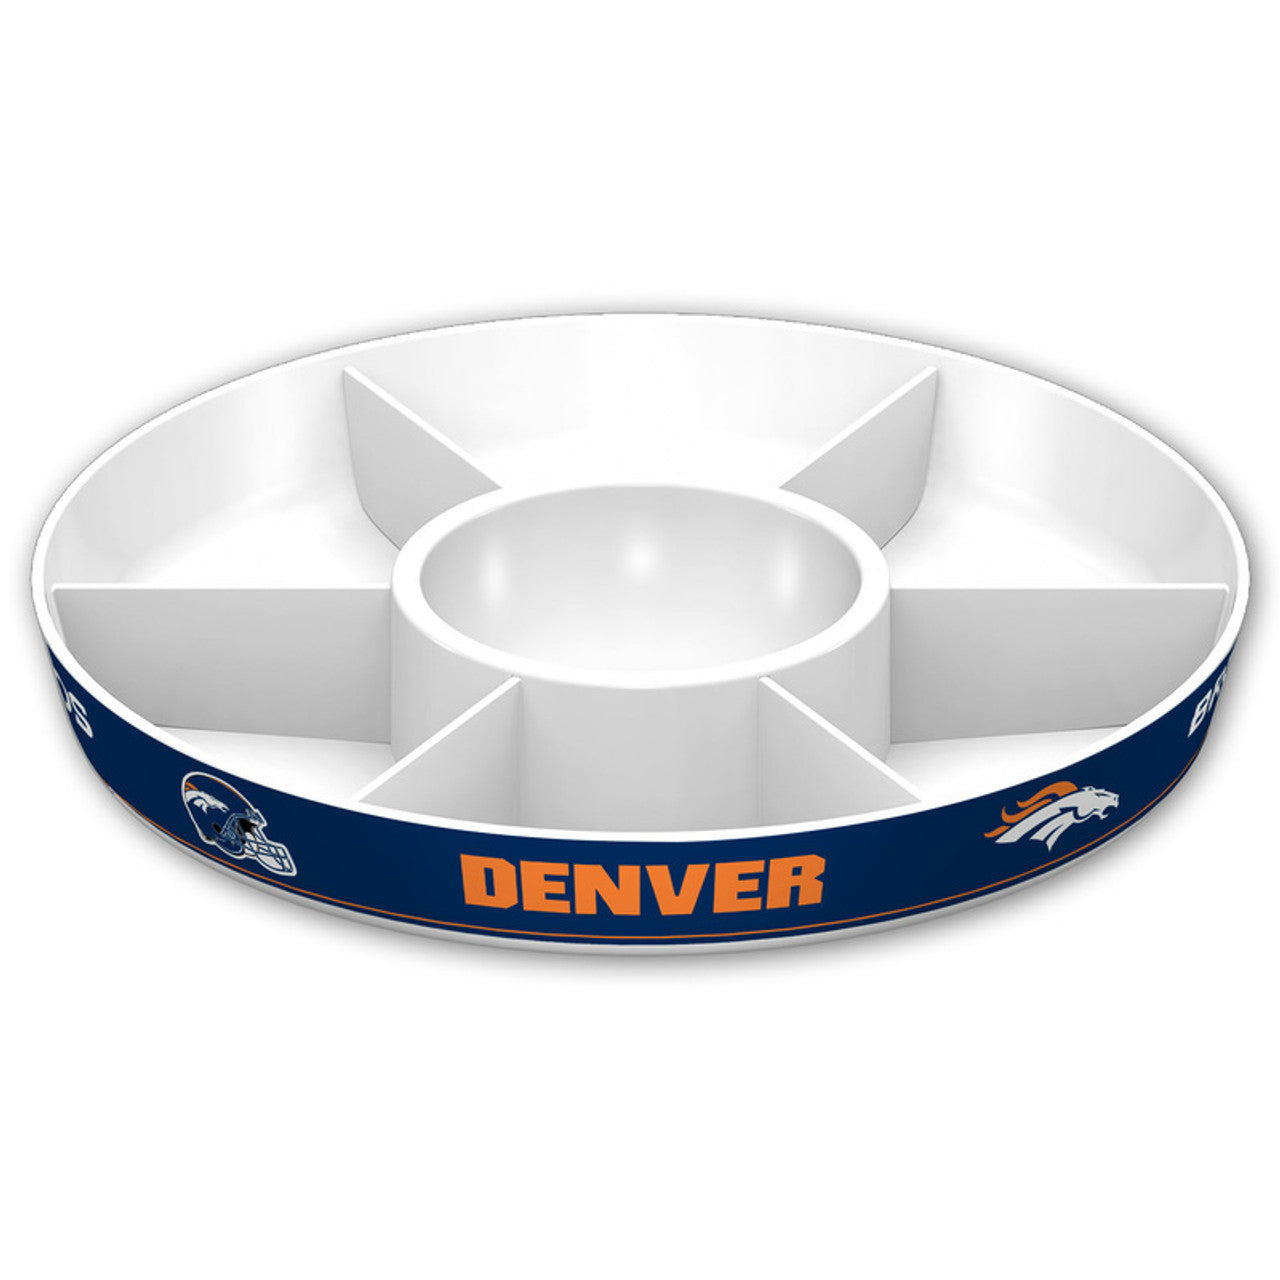 Denver Broncos Sectional Serving Party Platter Tray by Fremont Die